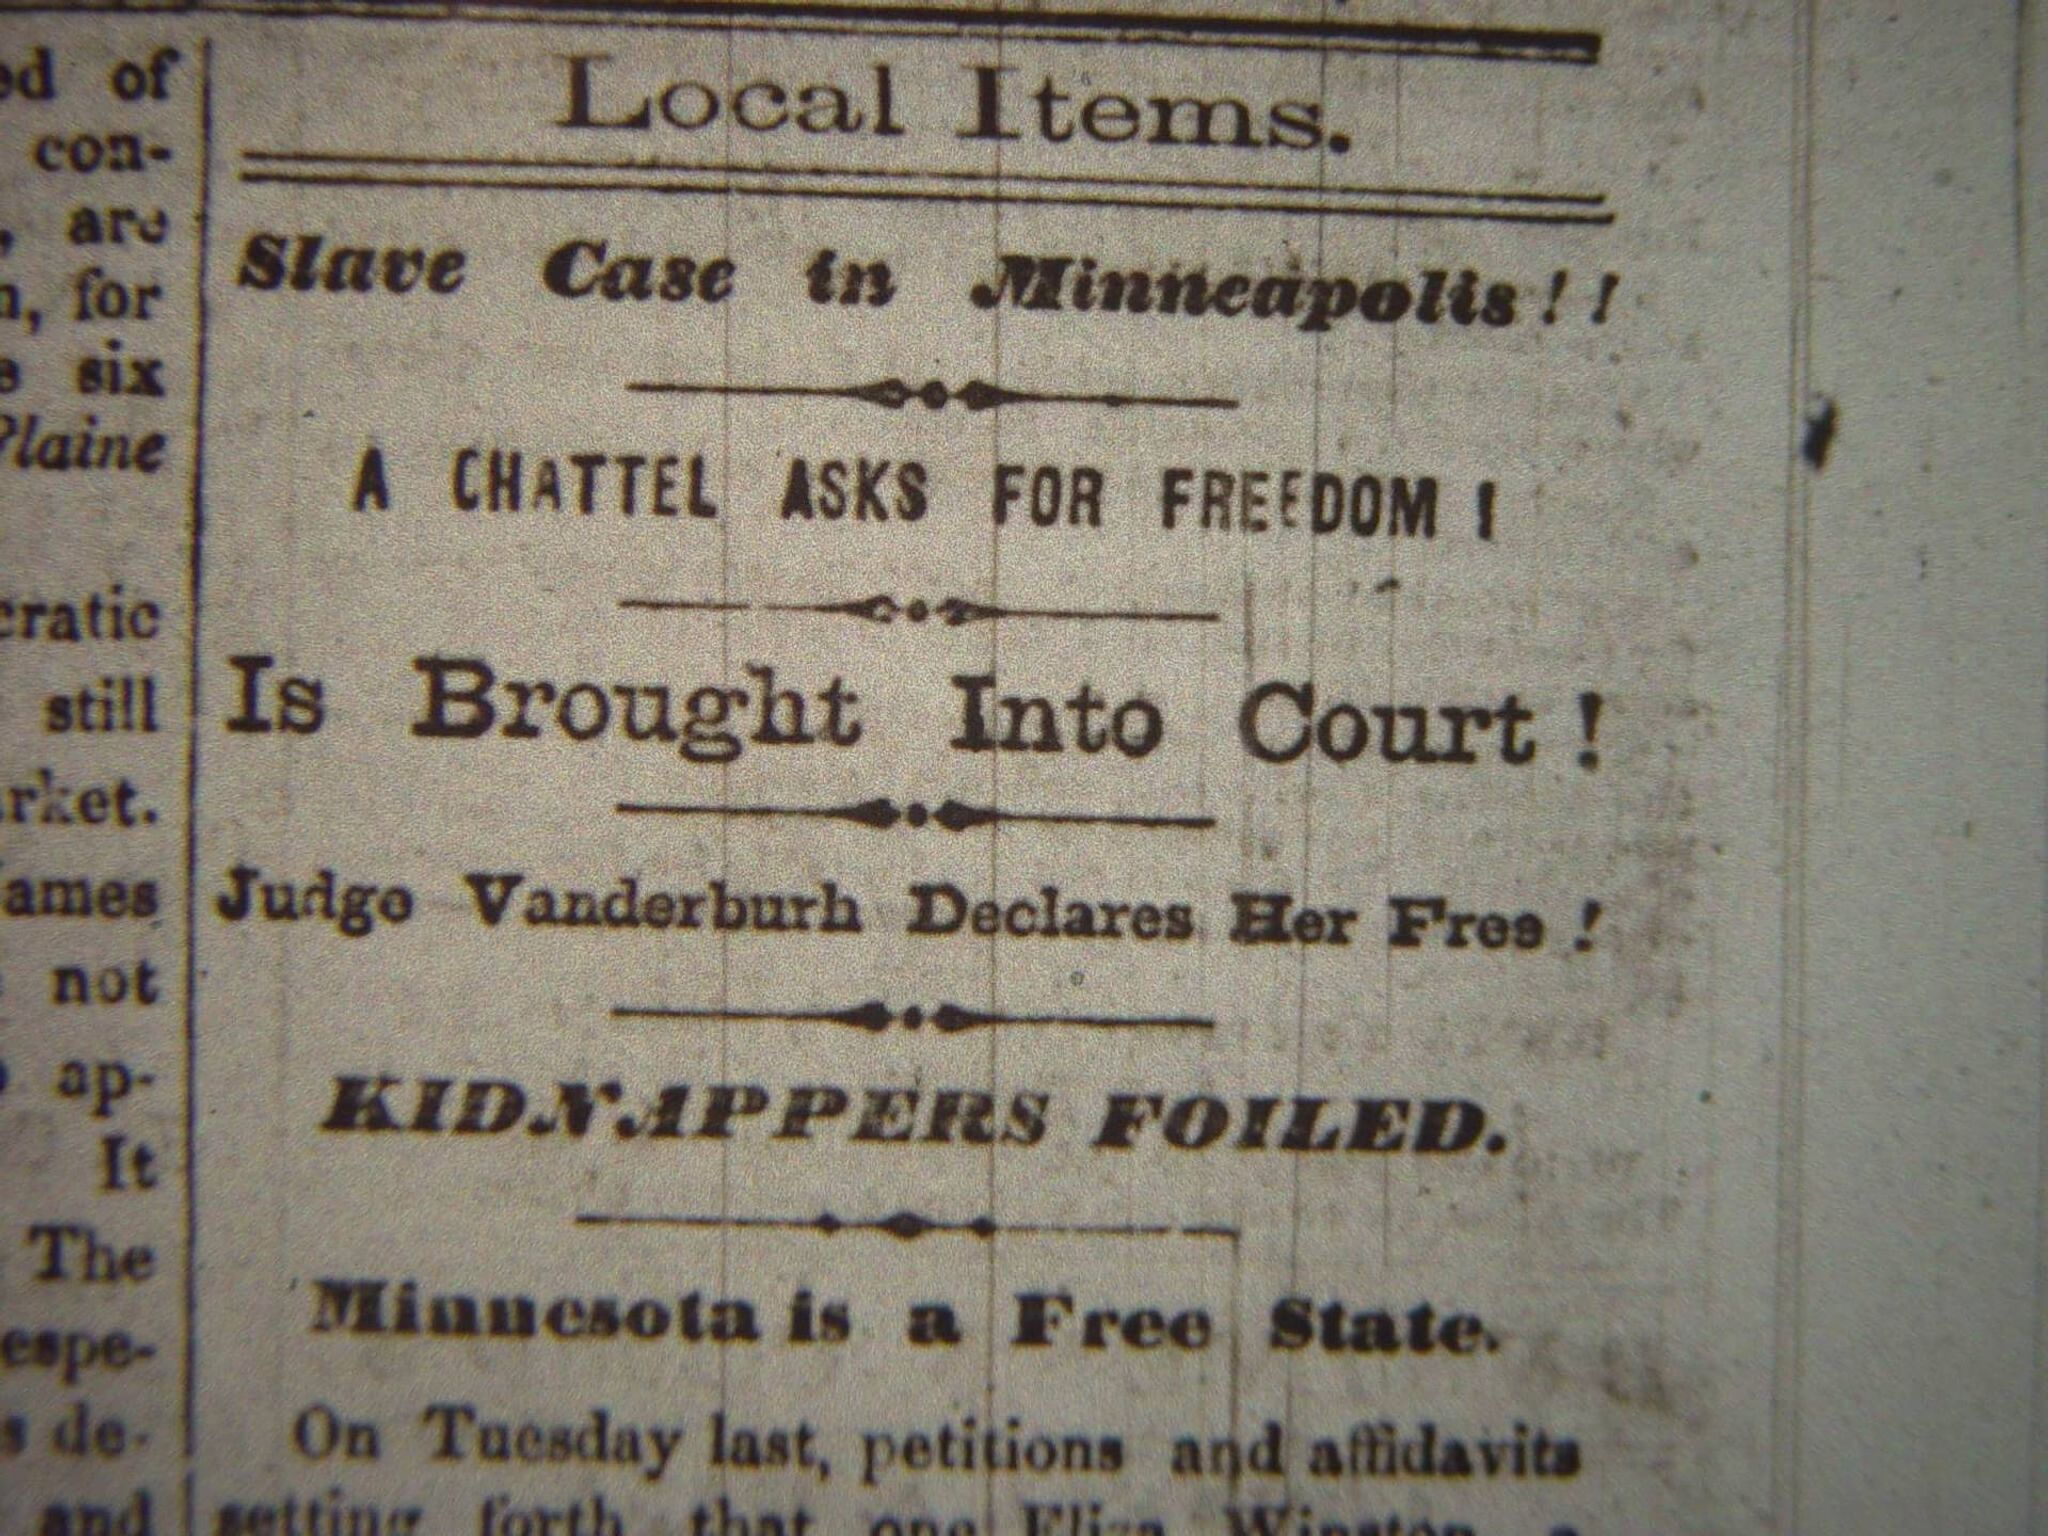 A newspaper story reports on Emily Grey's efforts to steal away slave Eliza Winston.